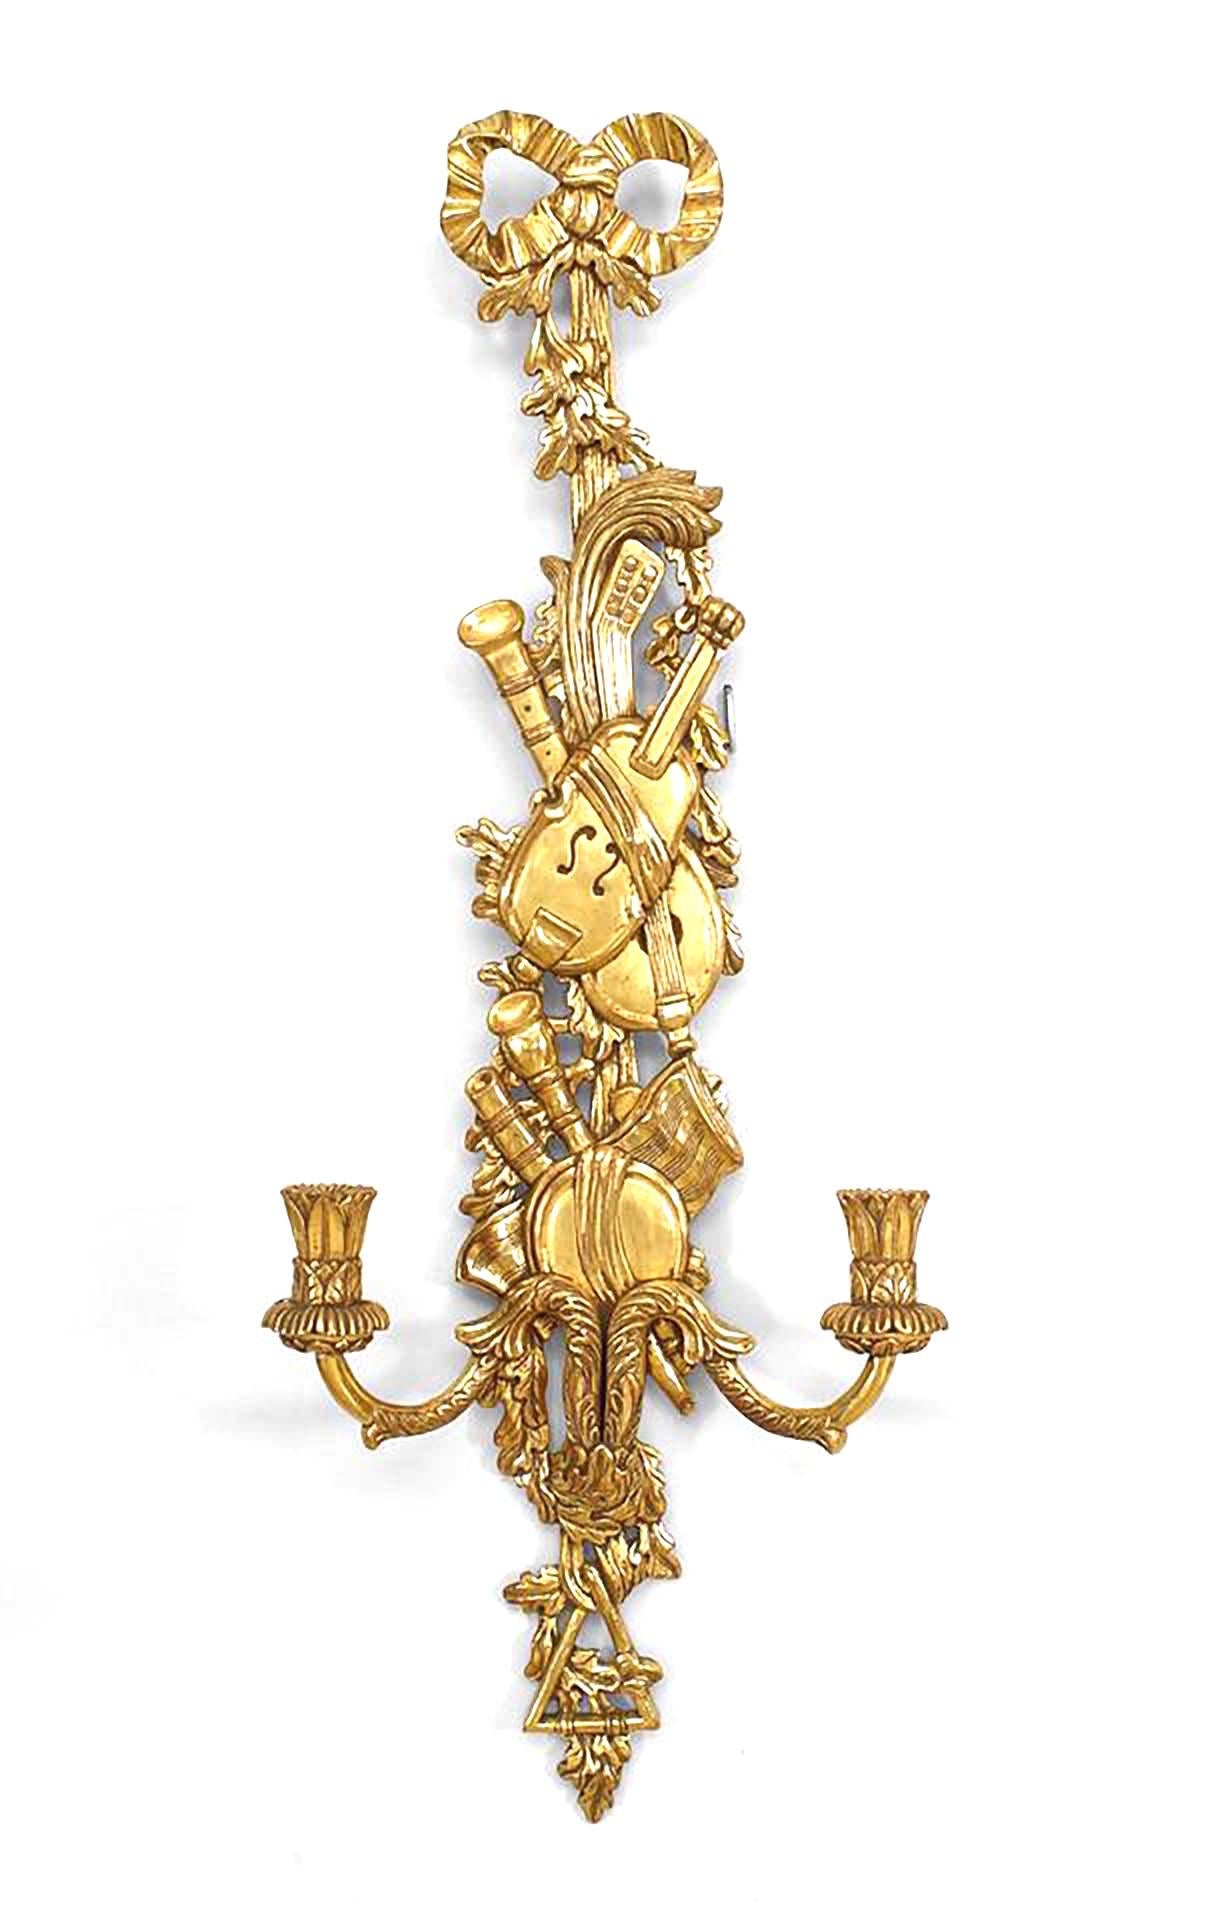 Pair of French Louis XV-Style gilt 2 arm wall sconces with carved design of musical instruments and bow knot top. (PRICED AS Pair)
